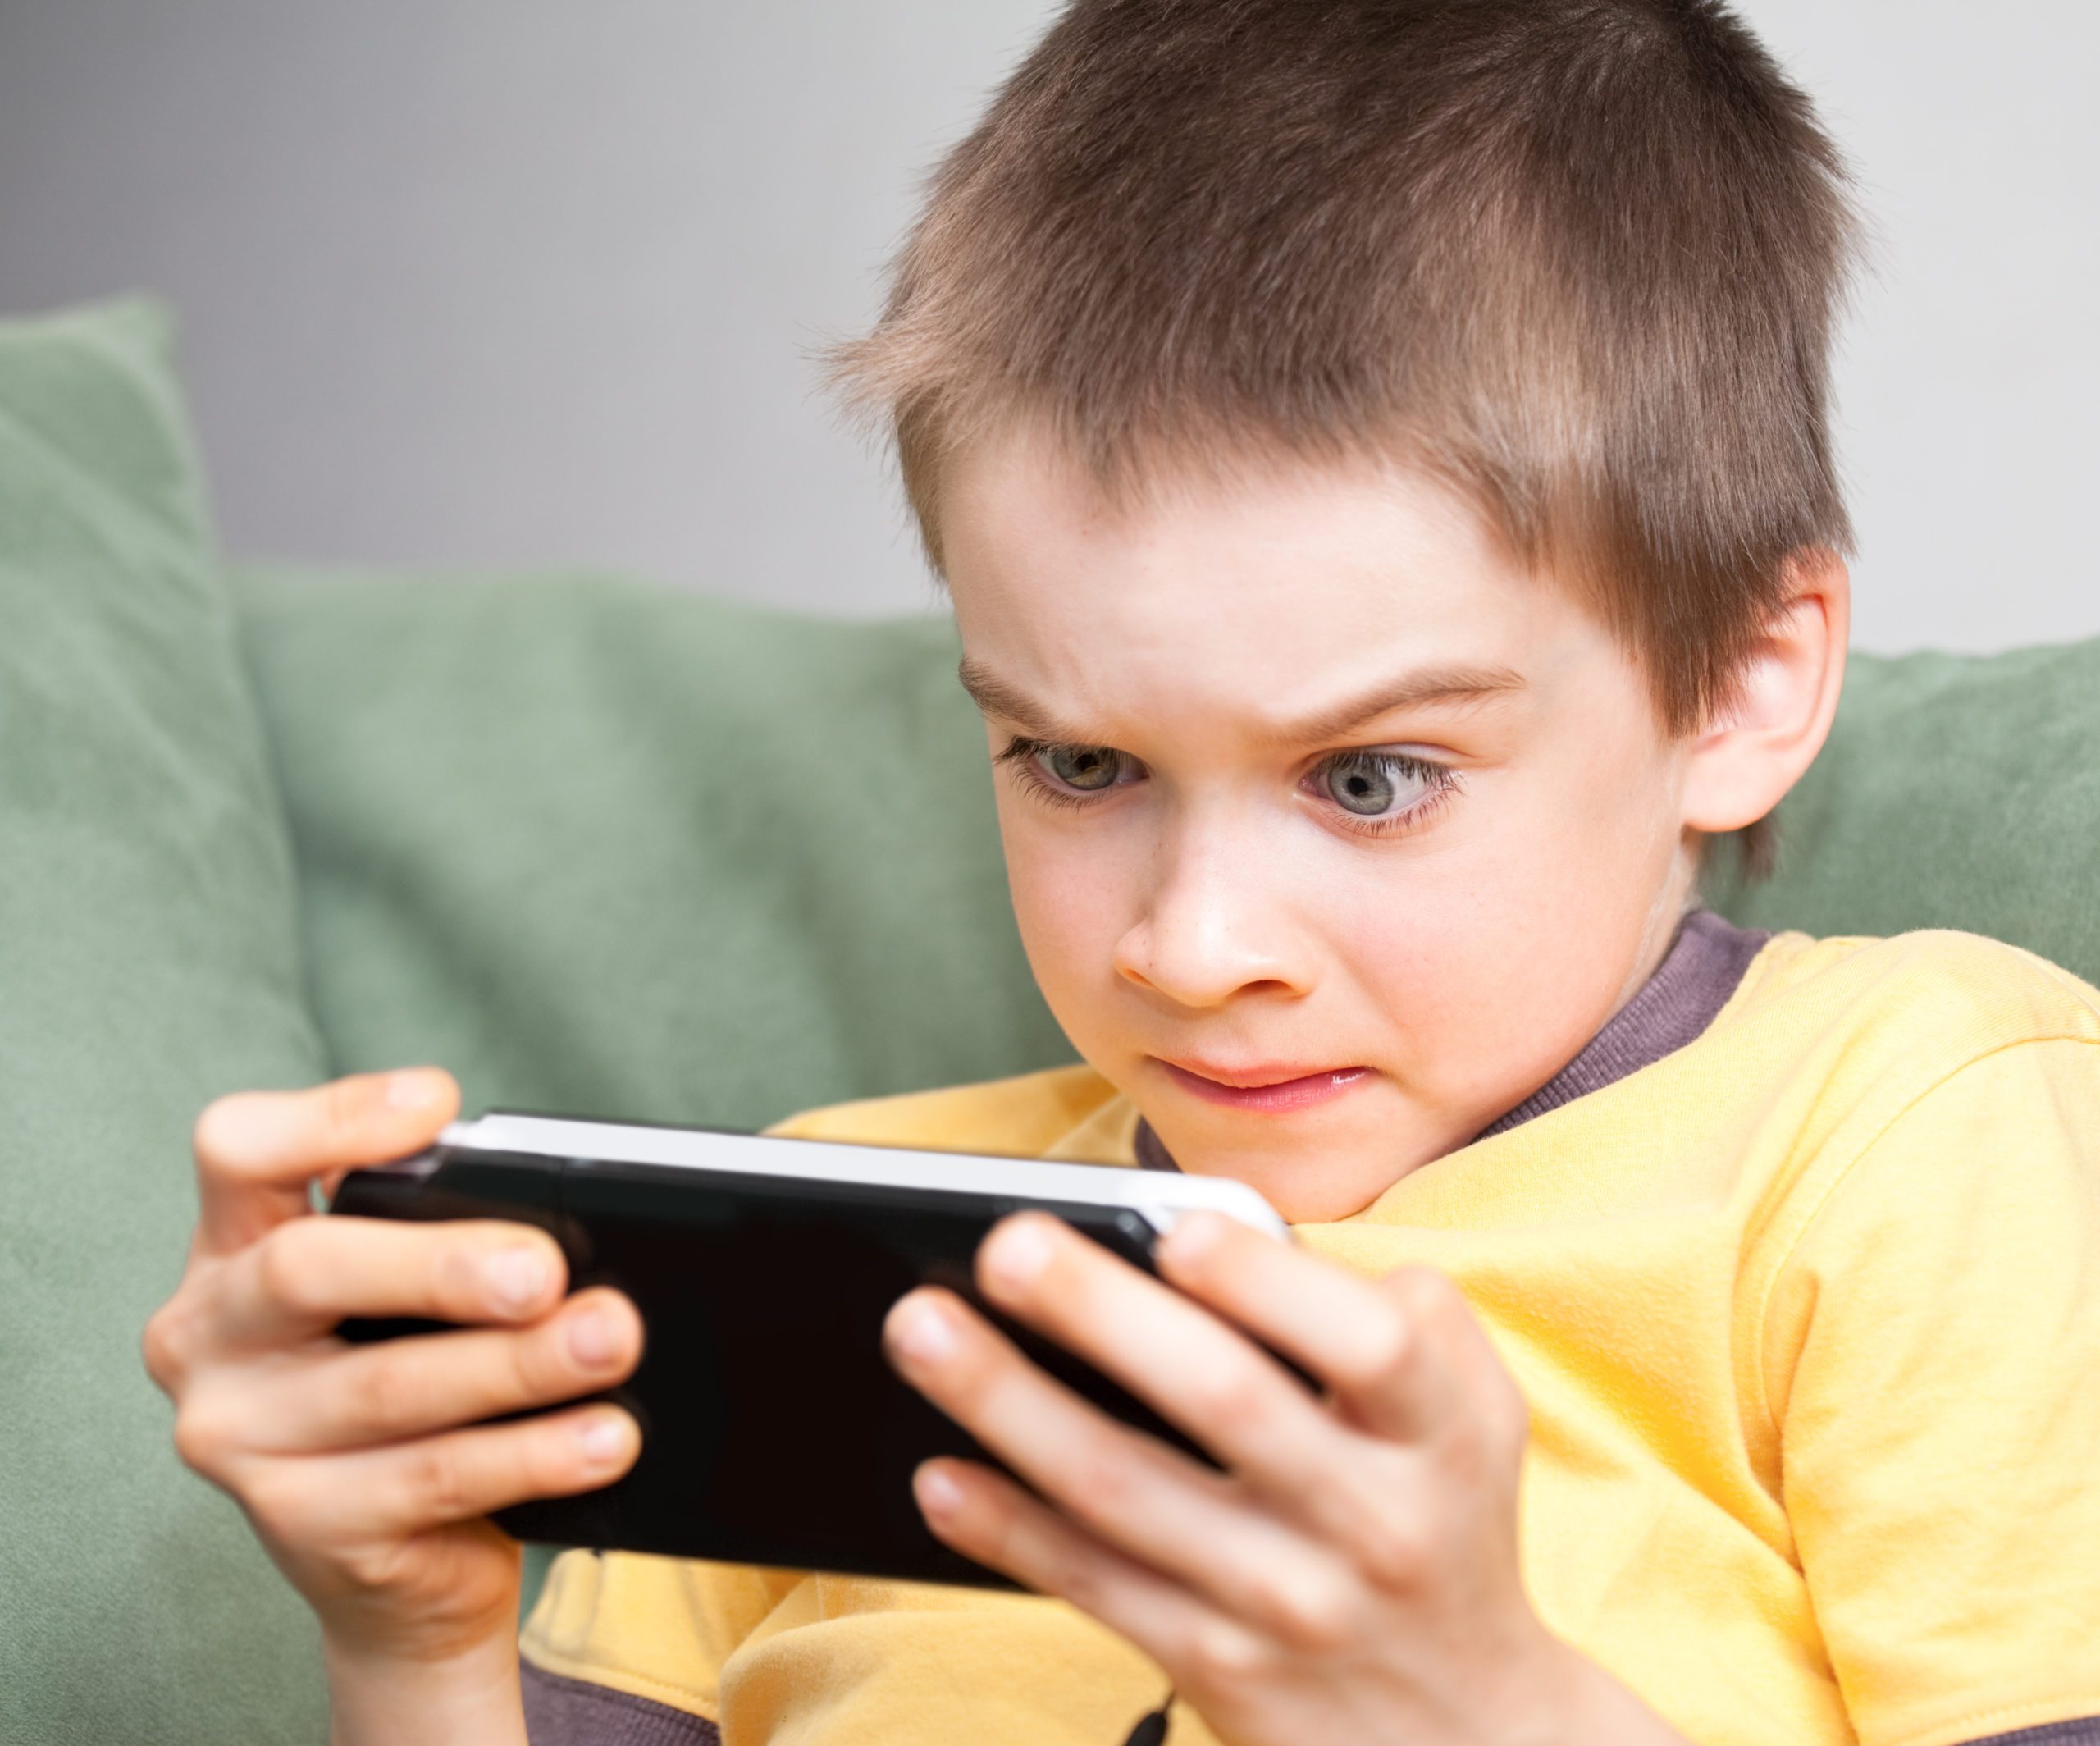 Are Screens Bad For Children